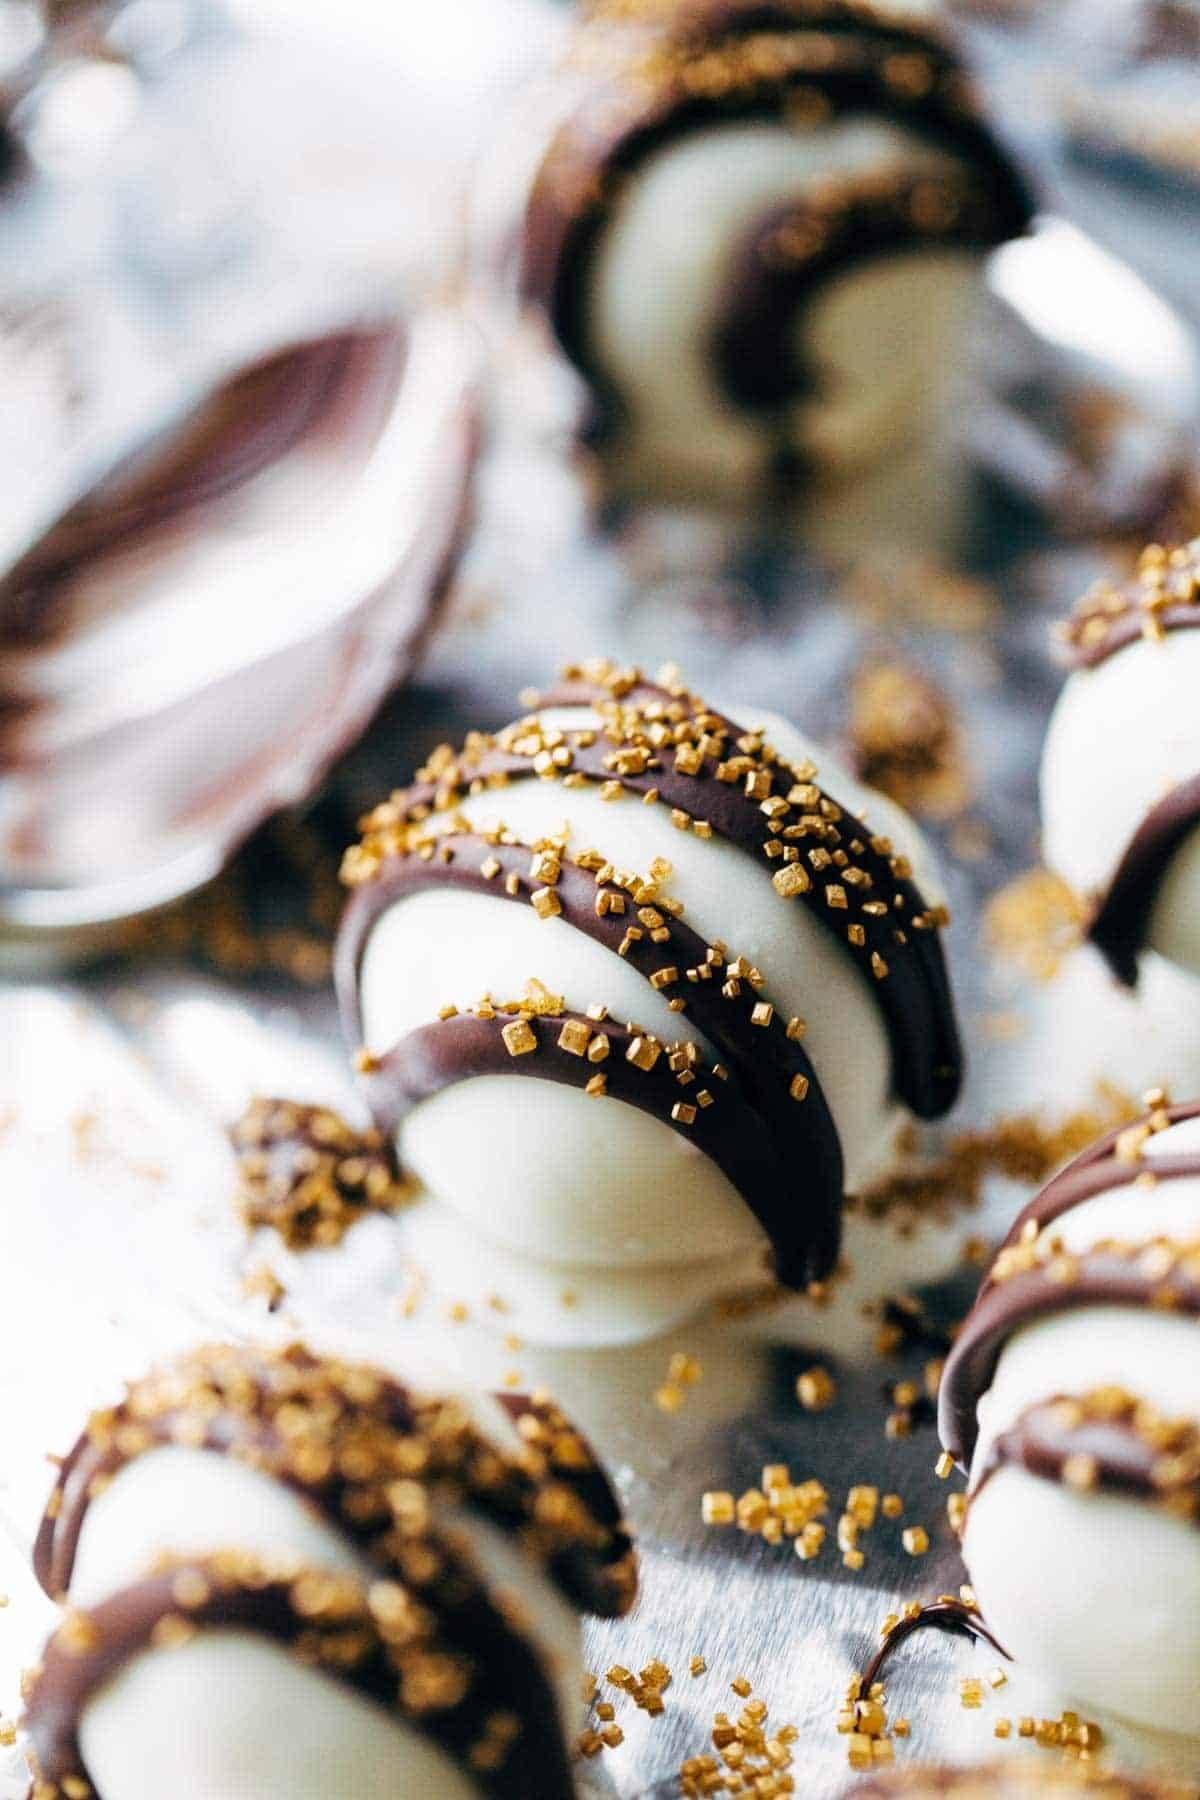 Desserts of white balls with chocolate stripes.